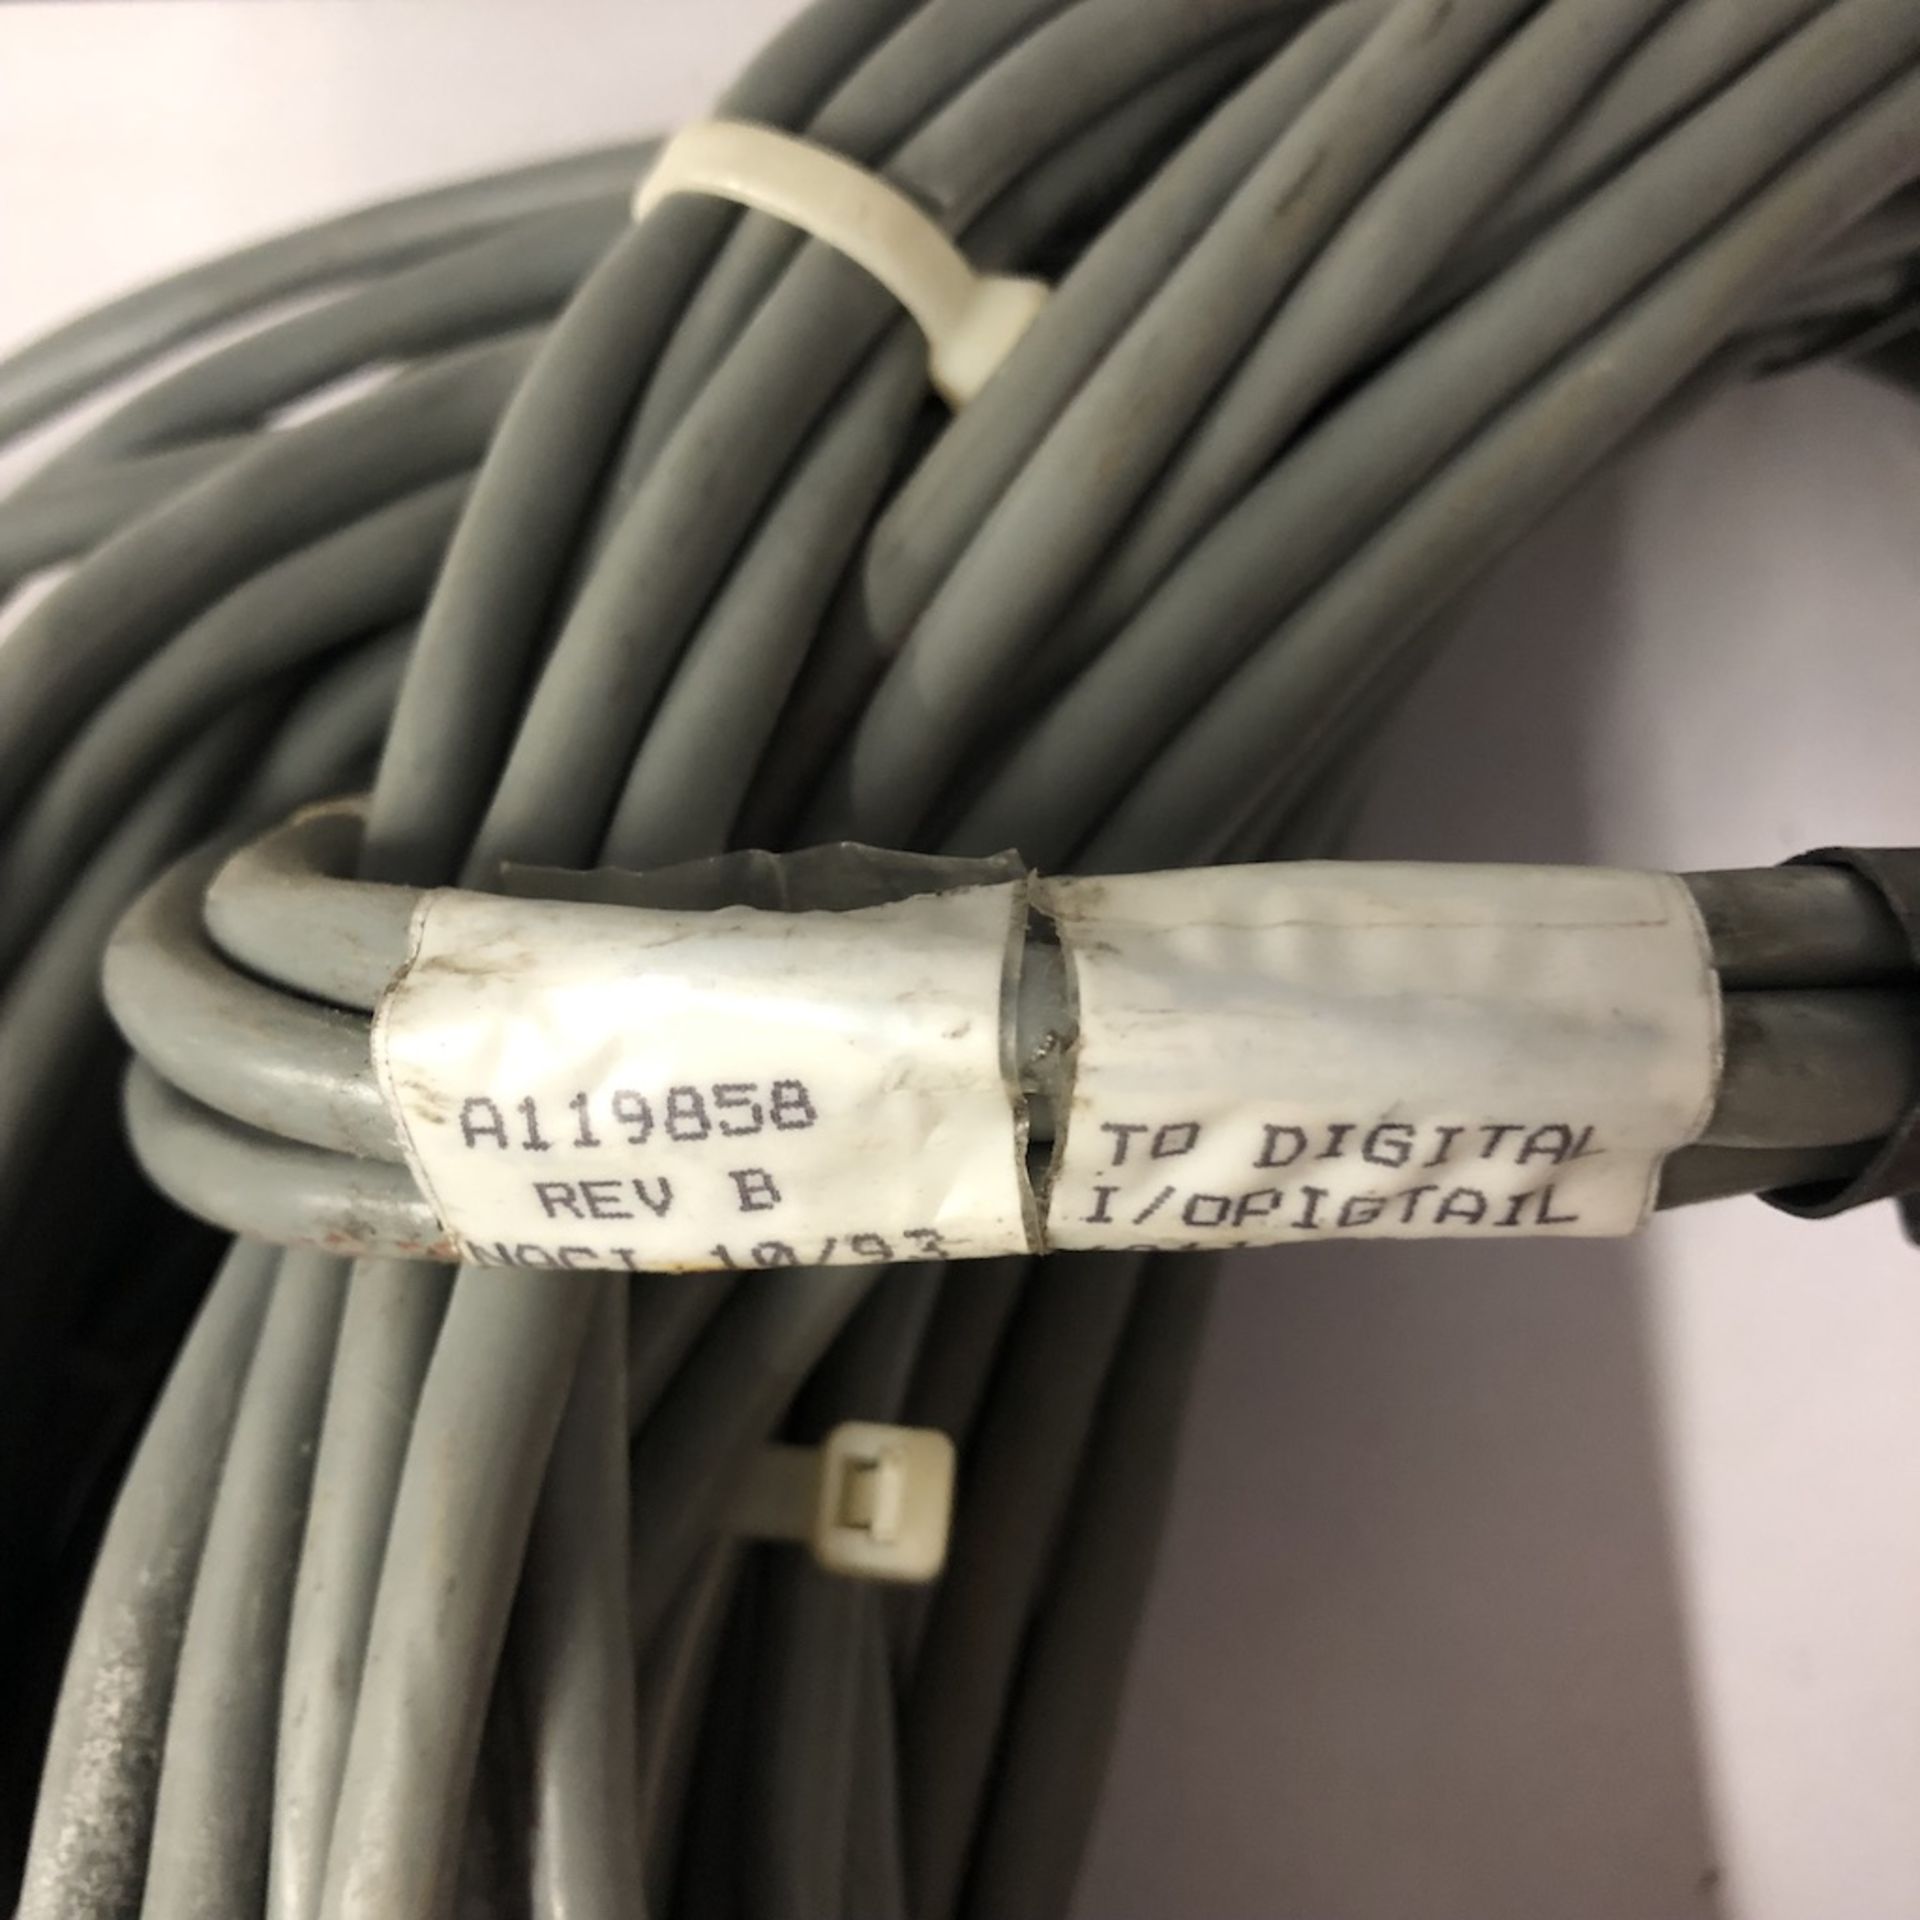 QTY OF 6 ITEMS: MANHATTAN ELECTRIC CABLE 24AWG (UL) TYPE CL2 75C AWM 2464 LL49185 SHIELDED CABLE, - Image 14 of 19